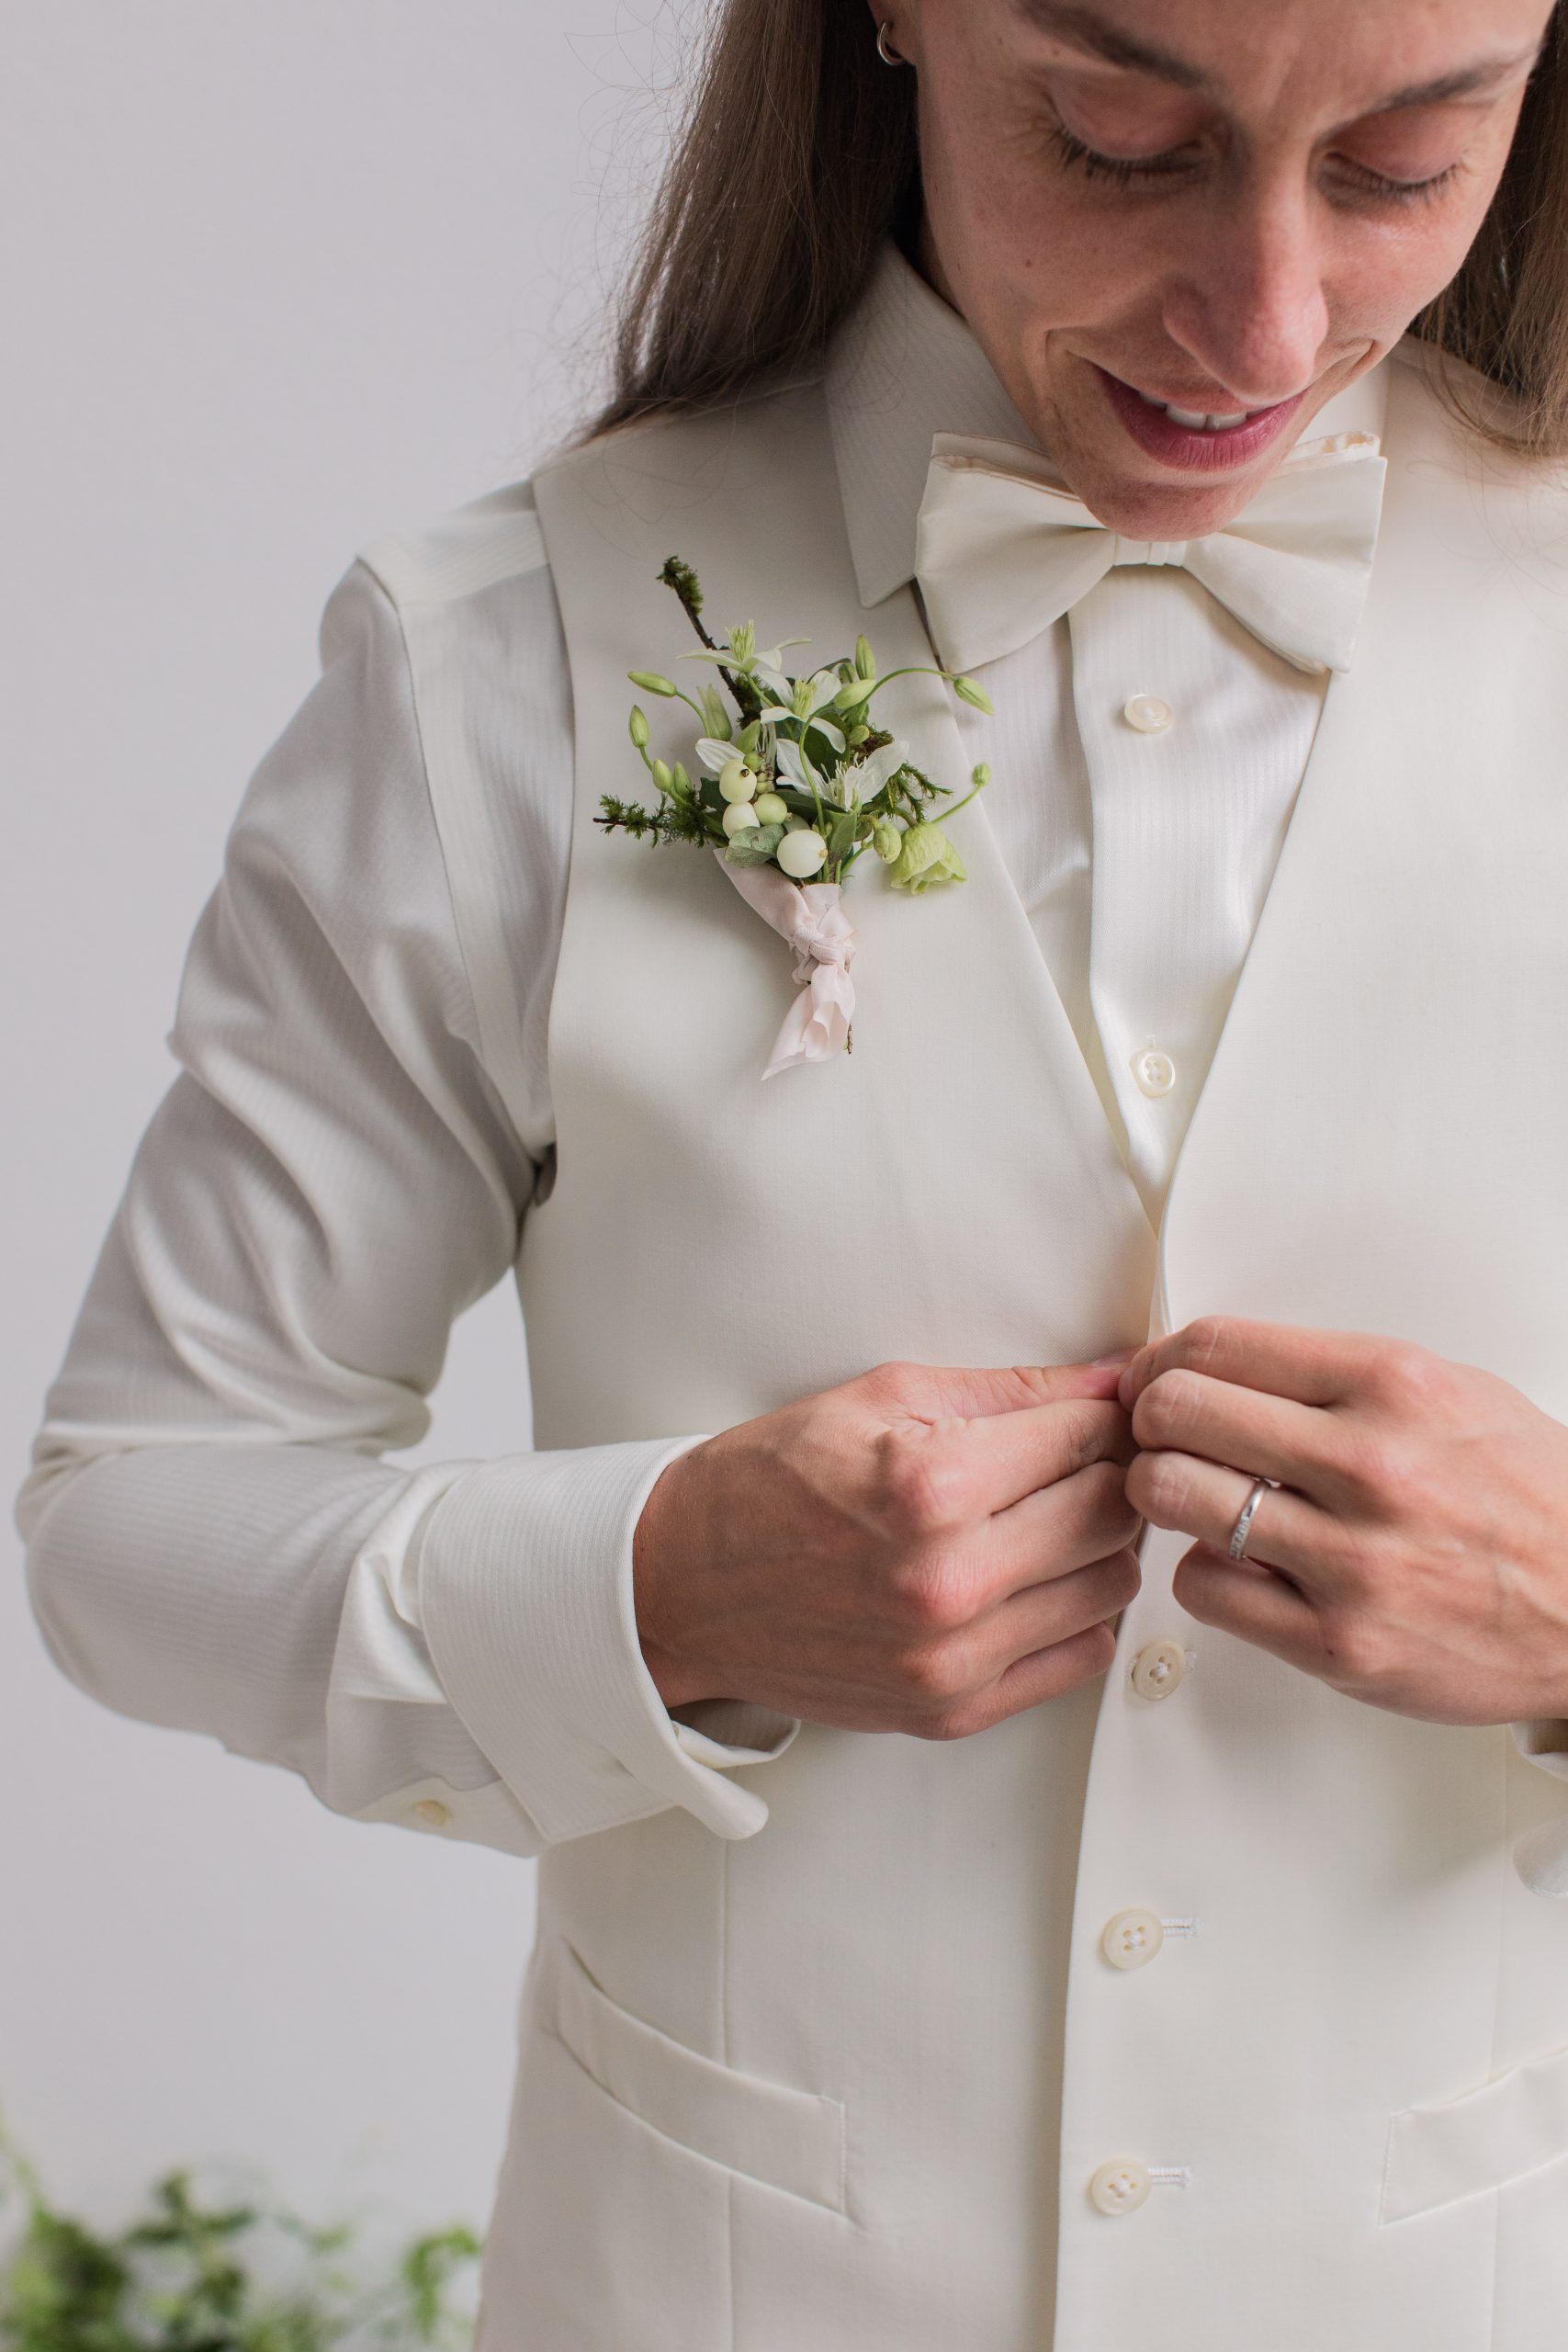 A queer bride buttons her vest before the wedding ceremony